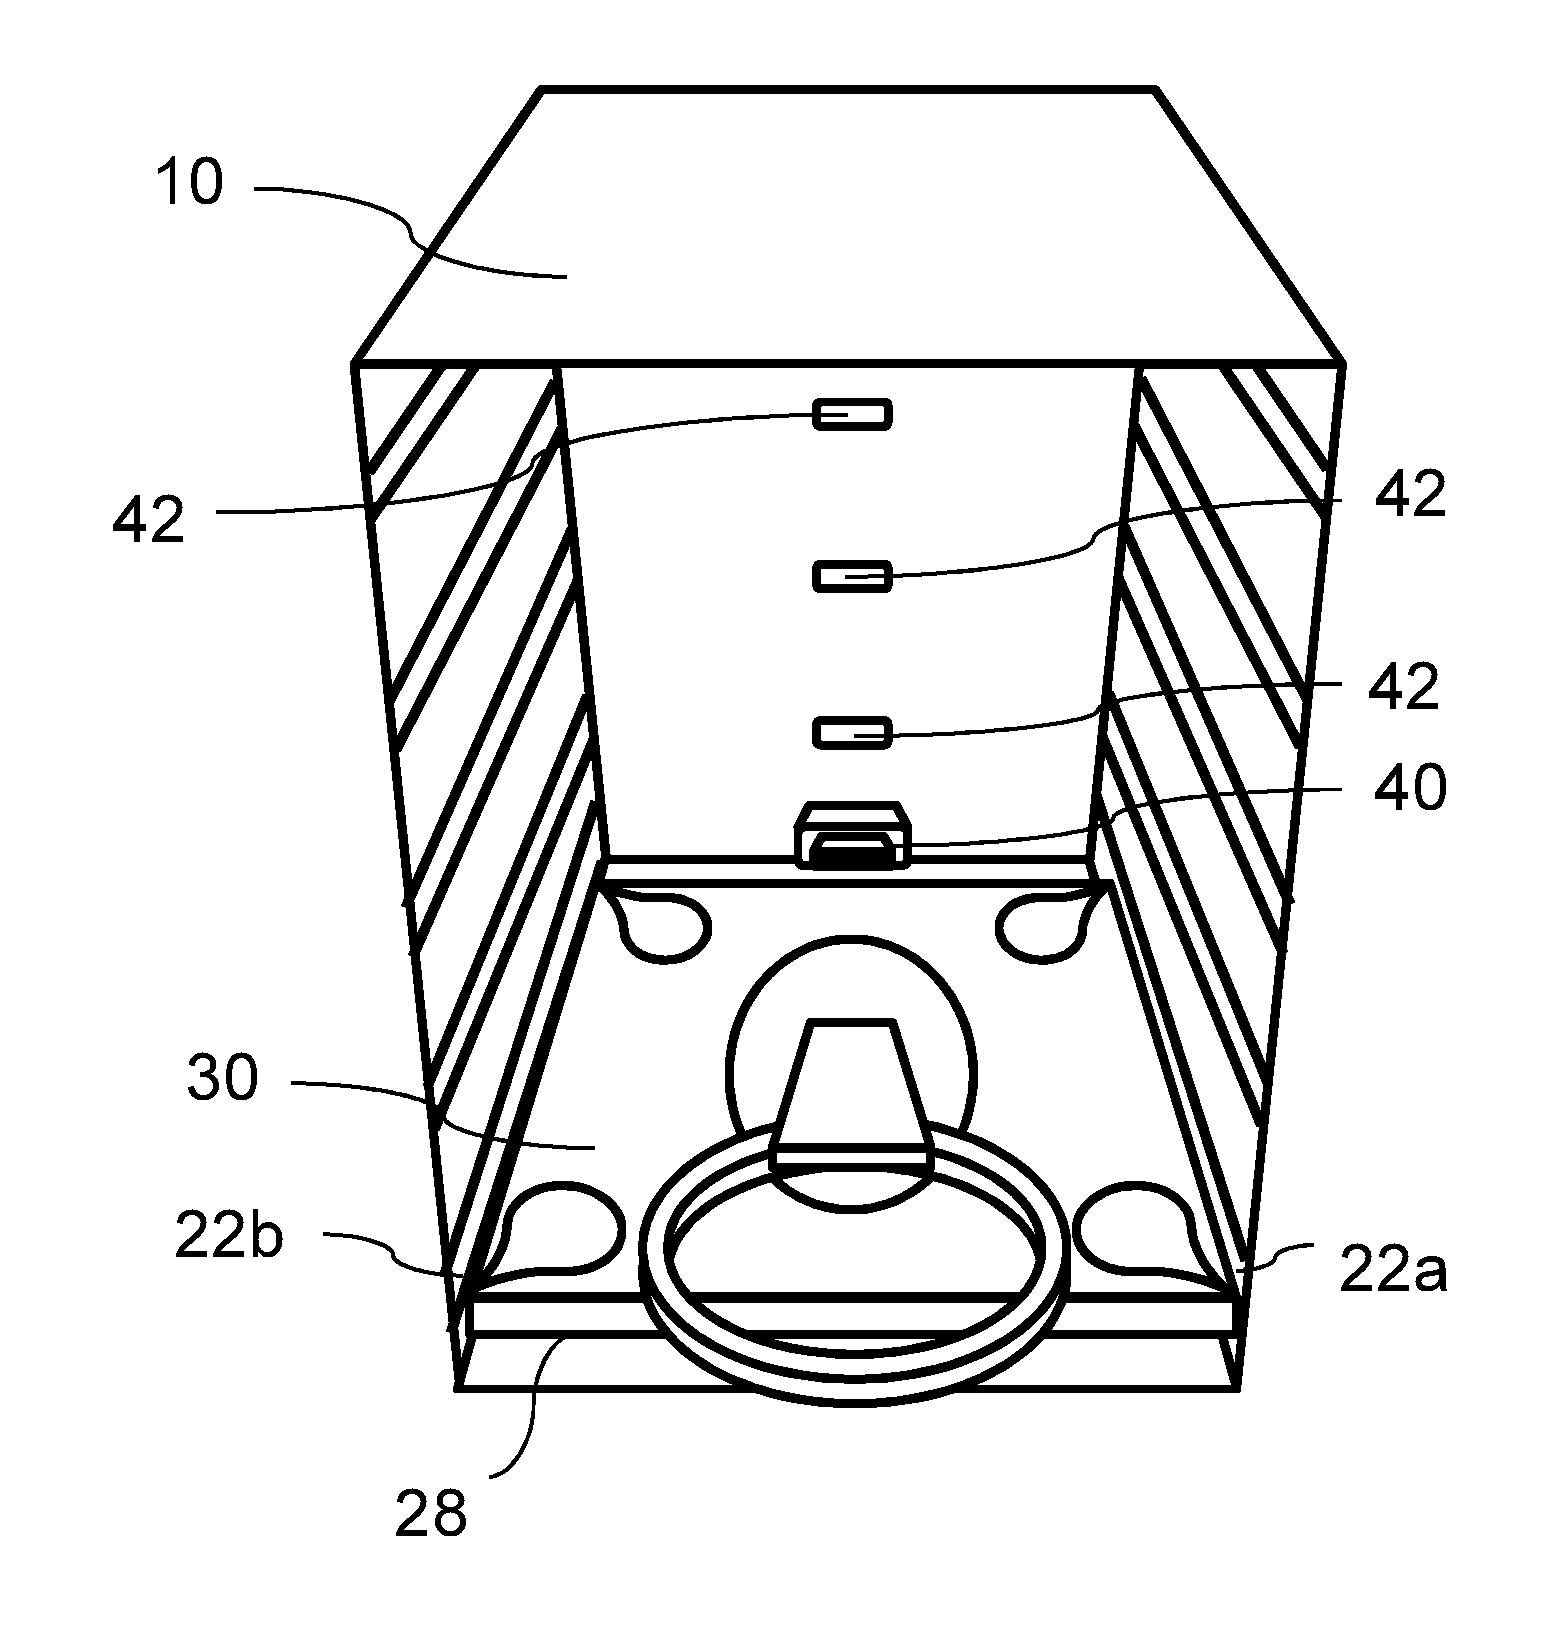 Tablet computer storage and charging apparatus